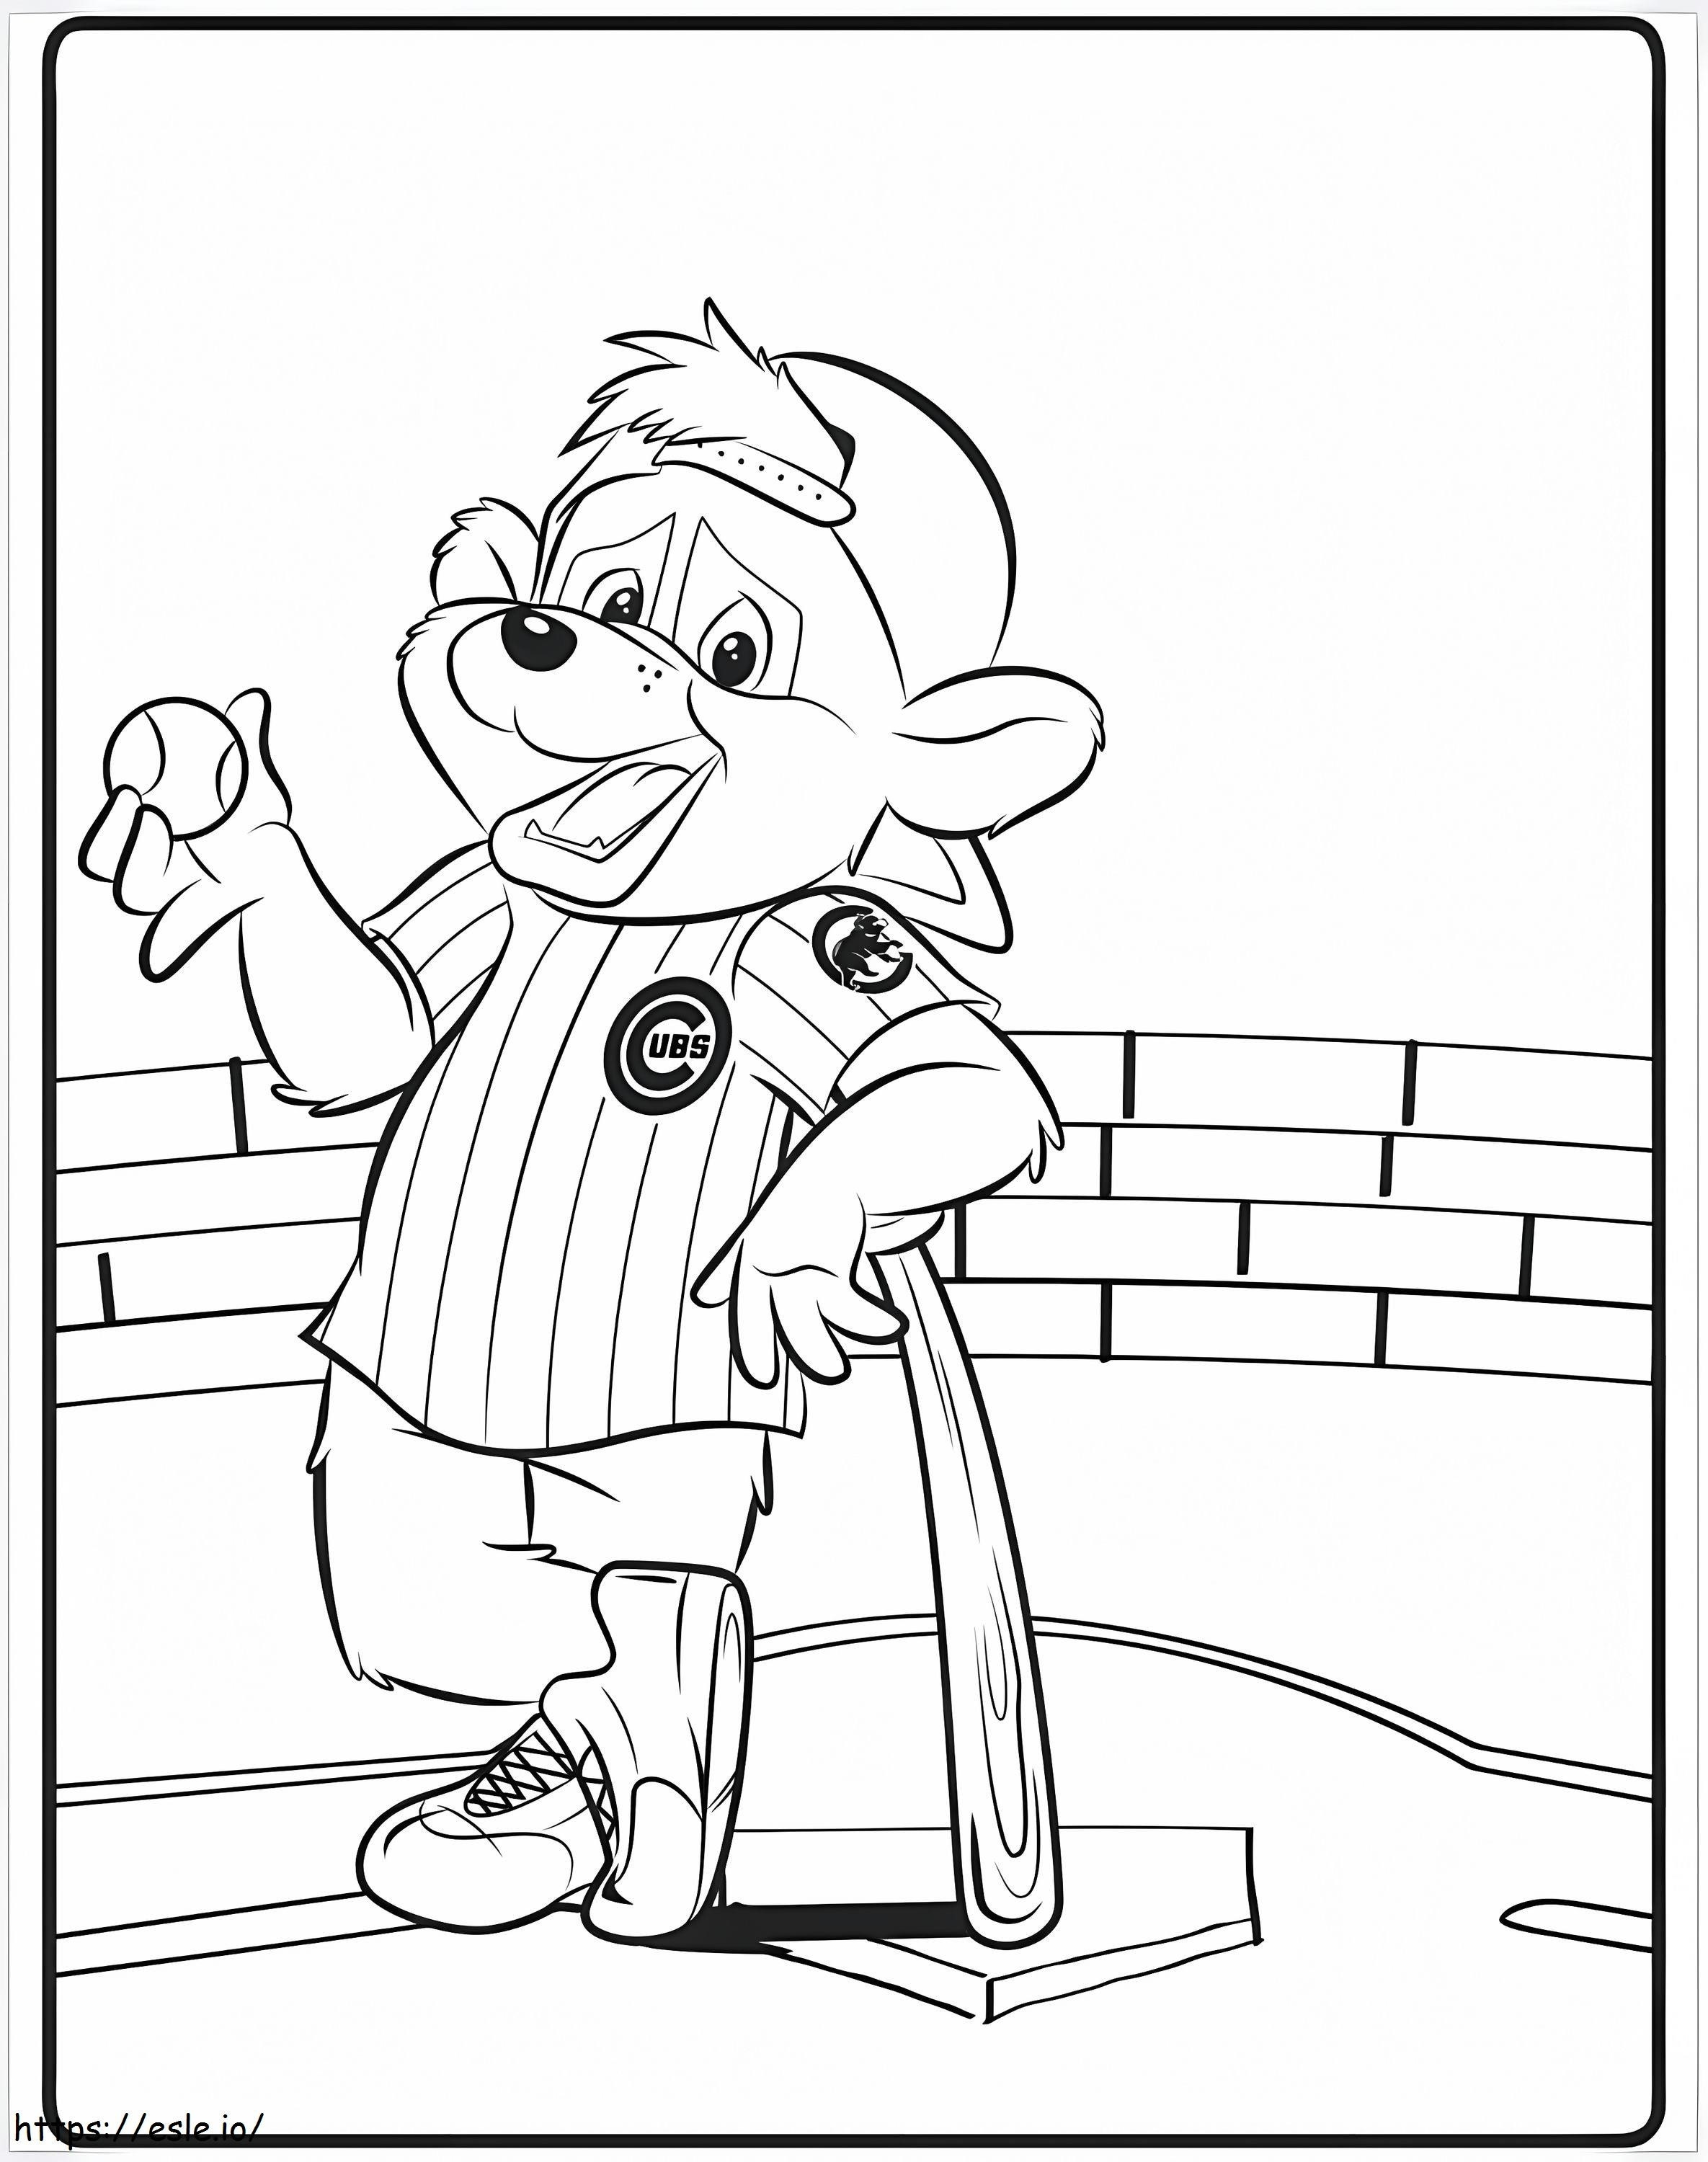 Chicago Cubs 5 coloring page